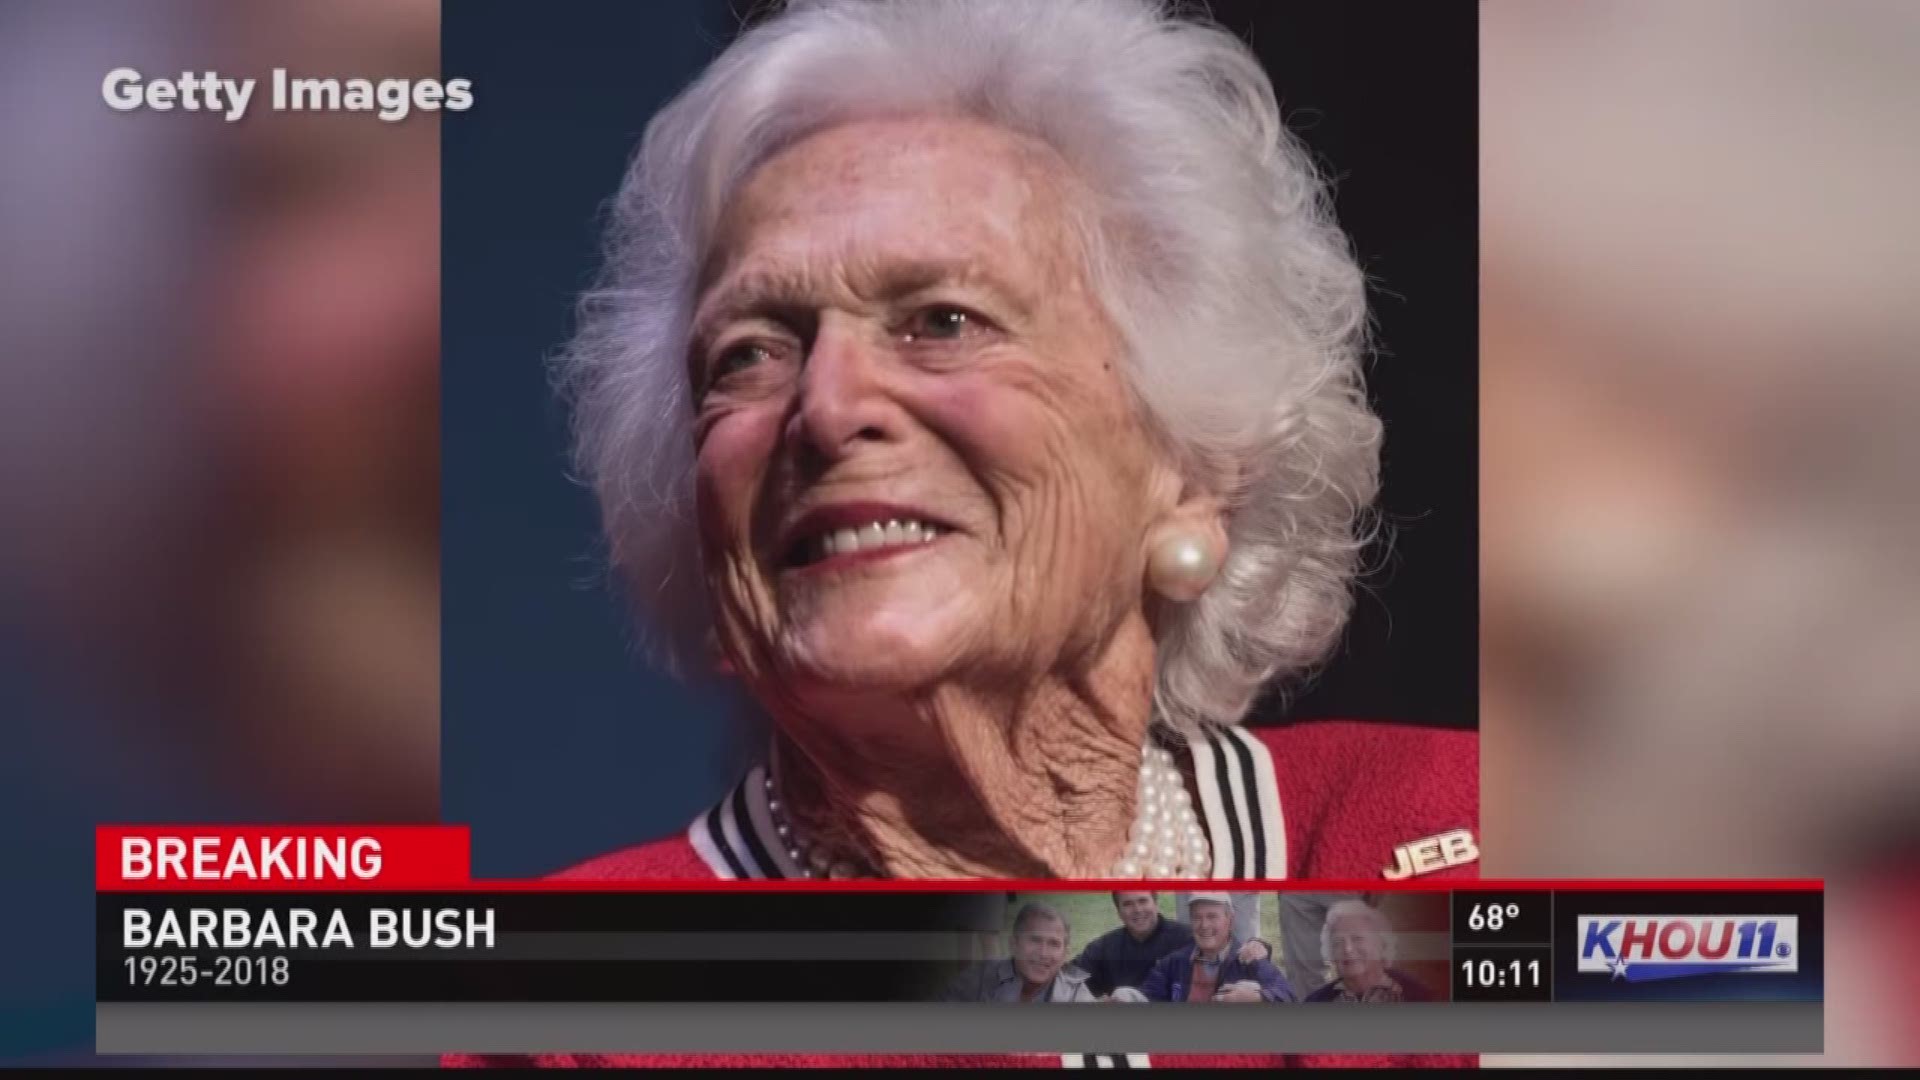 The funeral for former first lady Barbara Bush will be held Saturday, April 21, 2018.